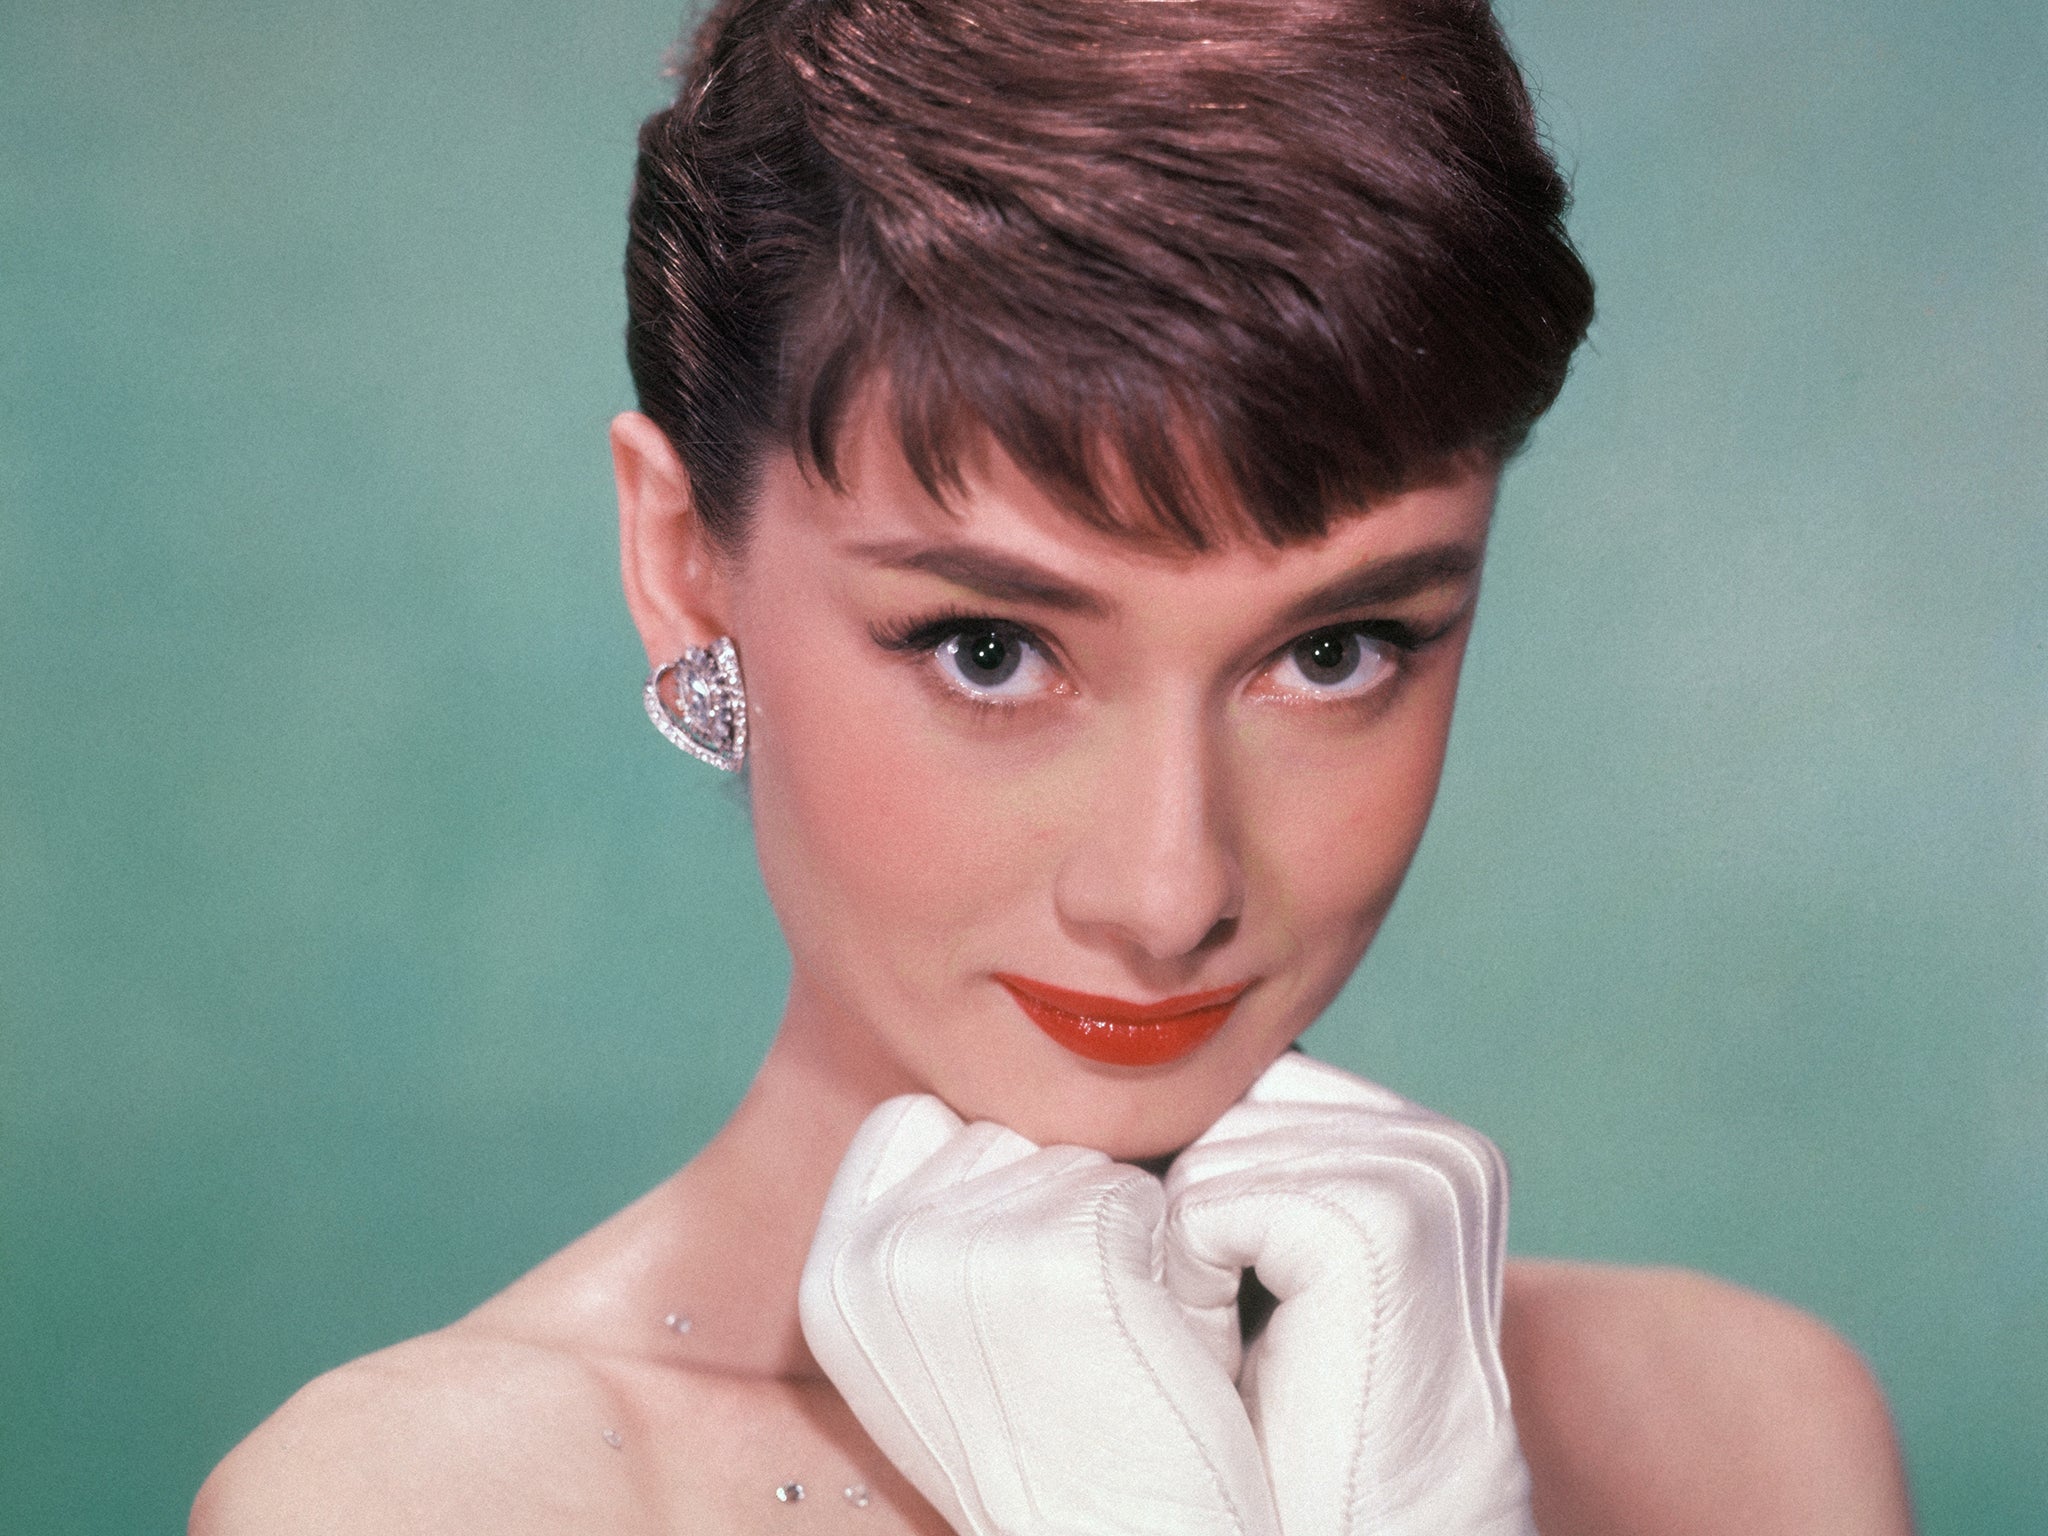 Audrey Hepburn – the icon of grace, class and elegance